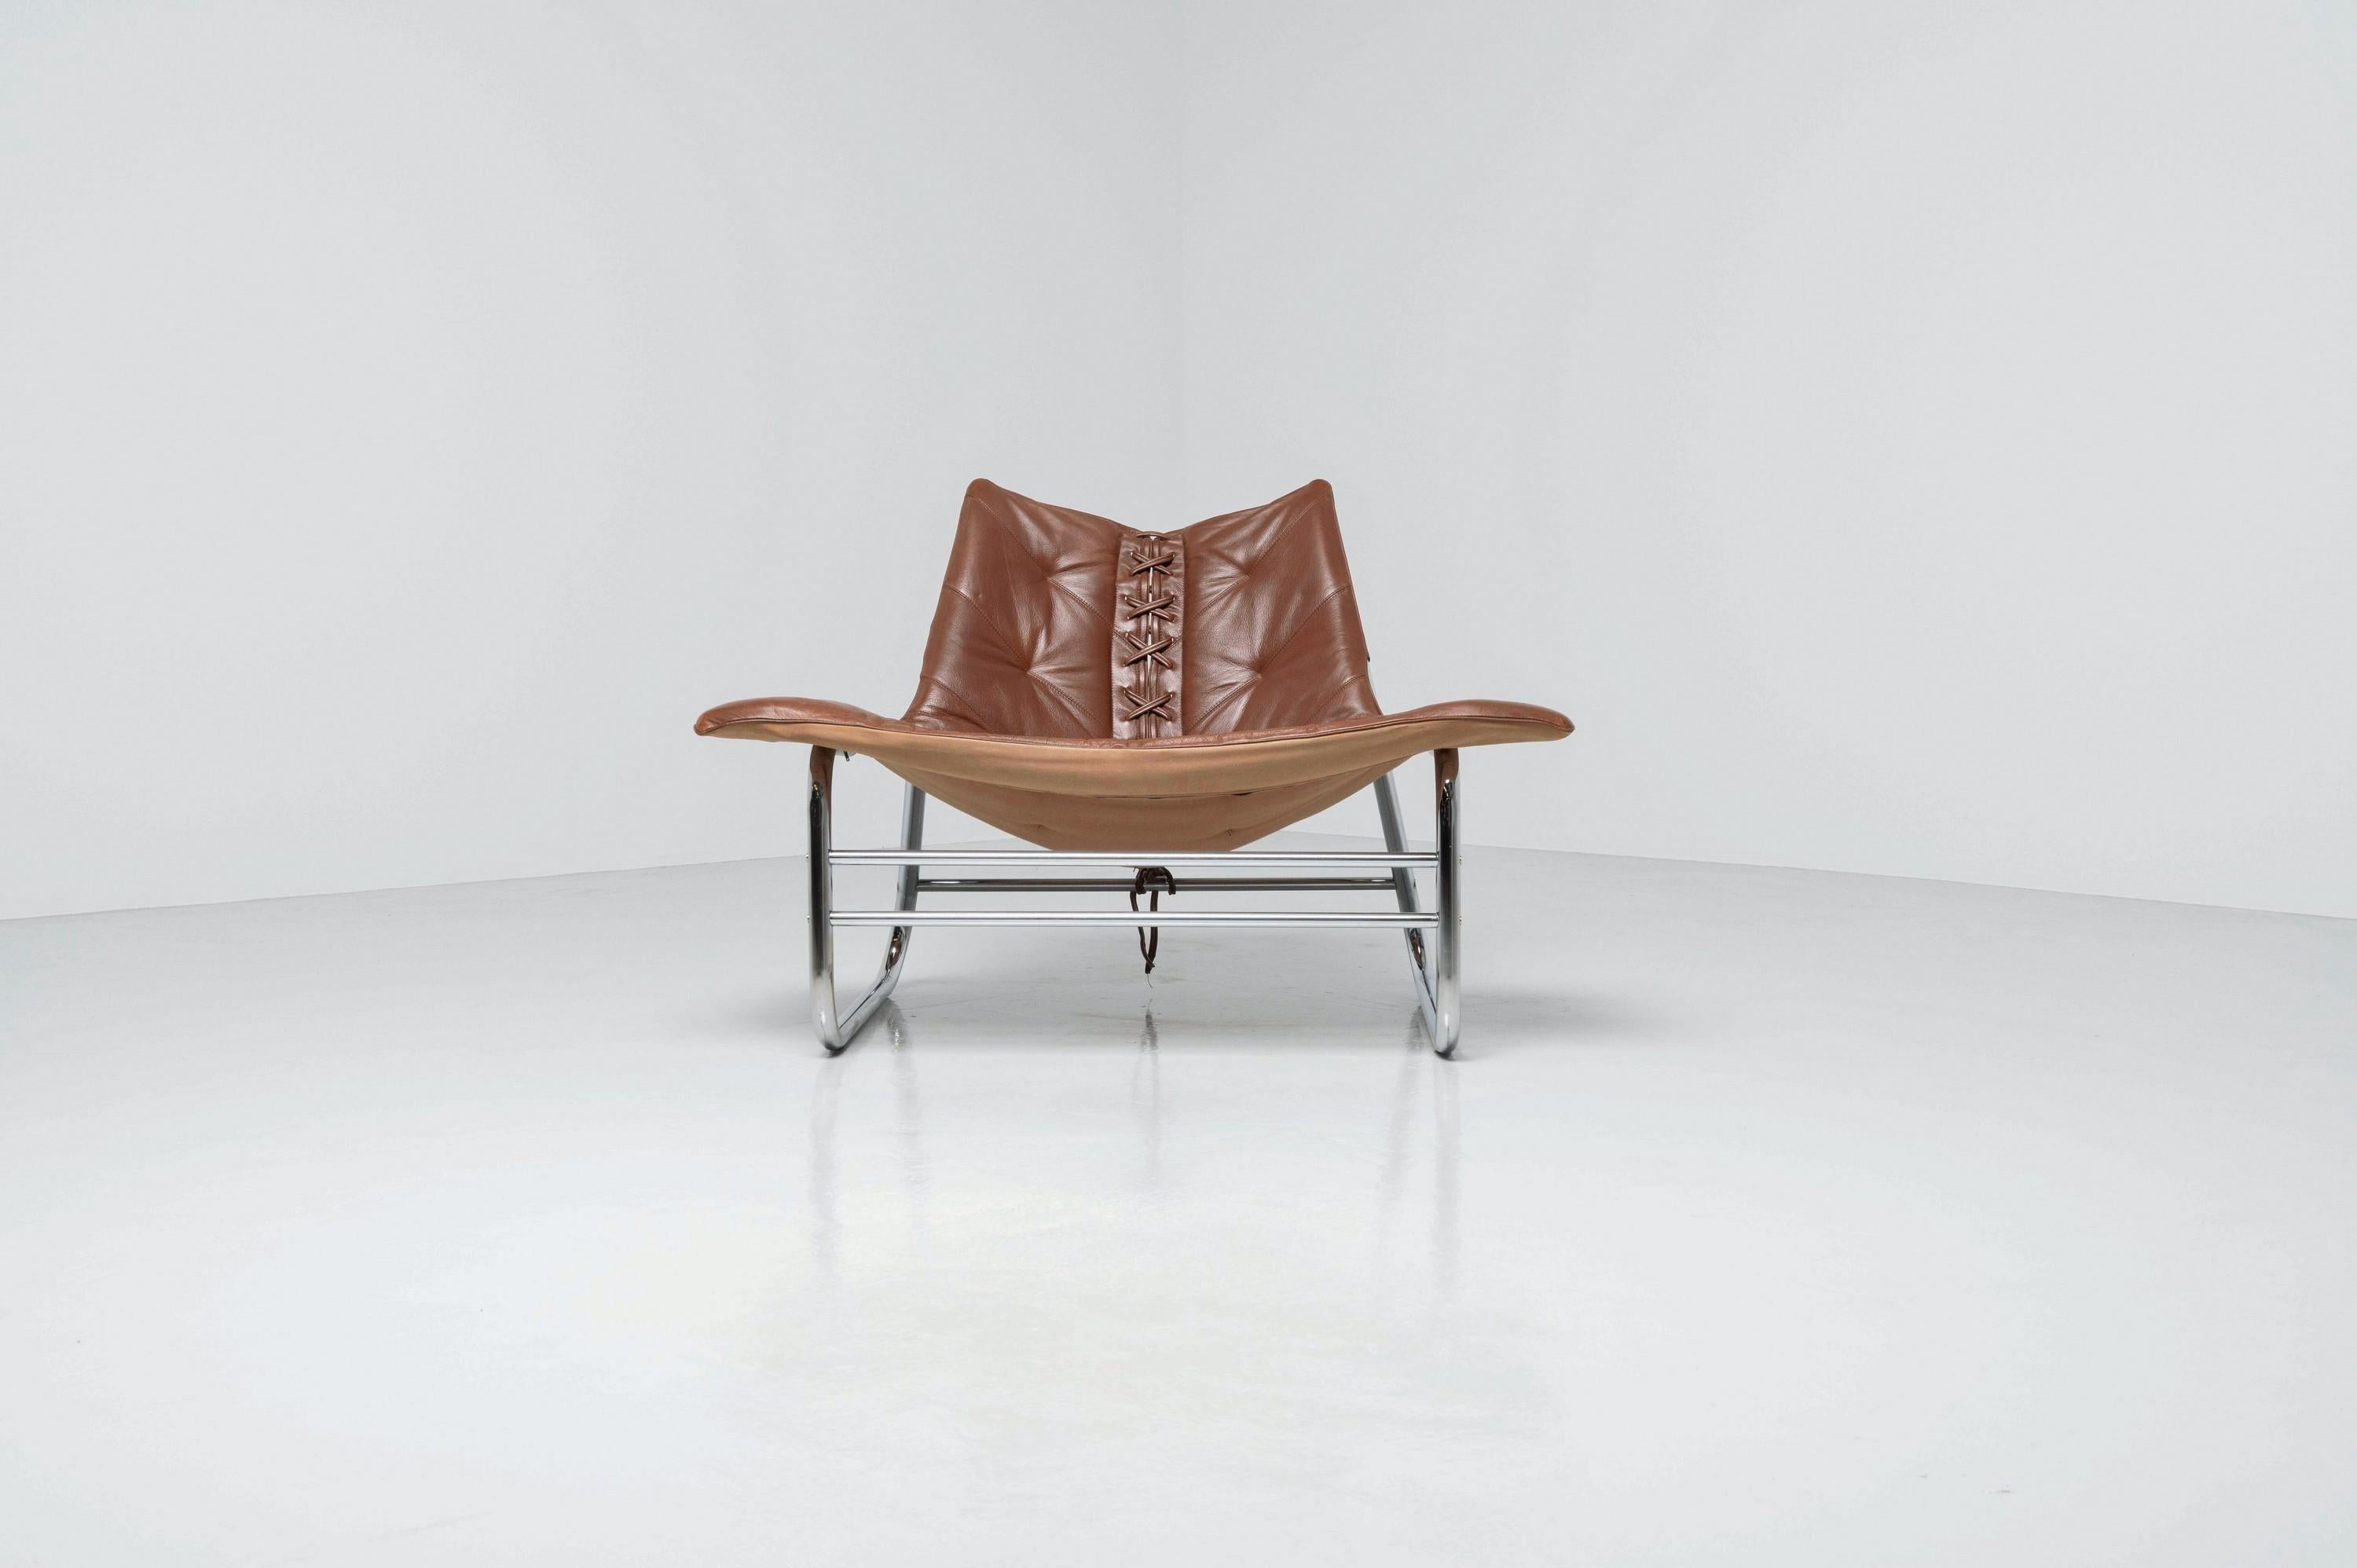 Not often does one of Johan Bertils' designs come up for sale, but hereby there is one beautiful example currently available. A stunning and very comfortable 'Corset' lounge chair made in Sweden by Swed-Form in 1970. The chair looks very